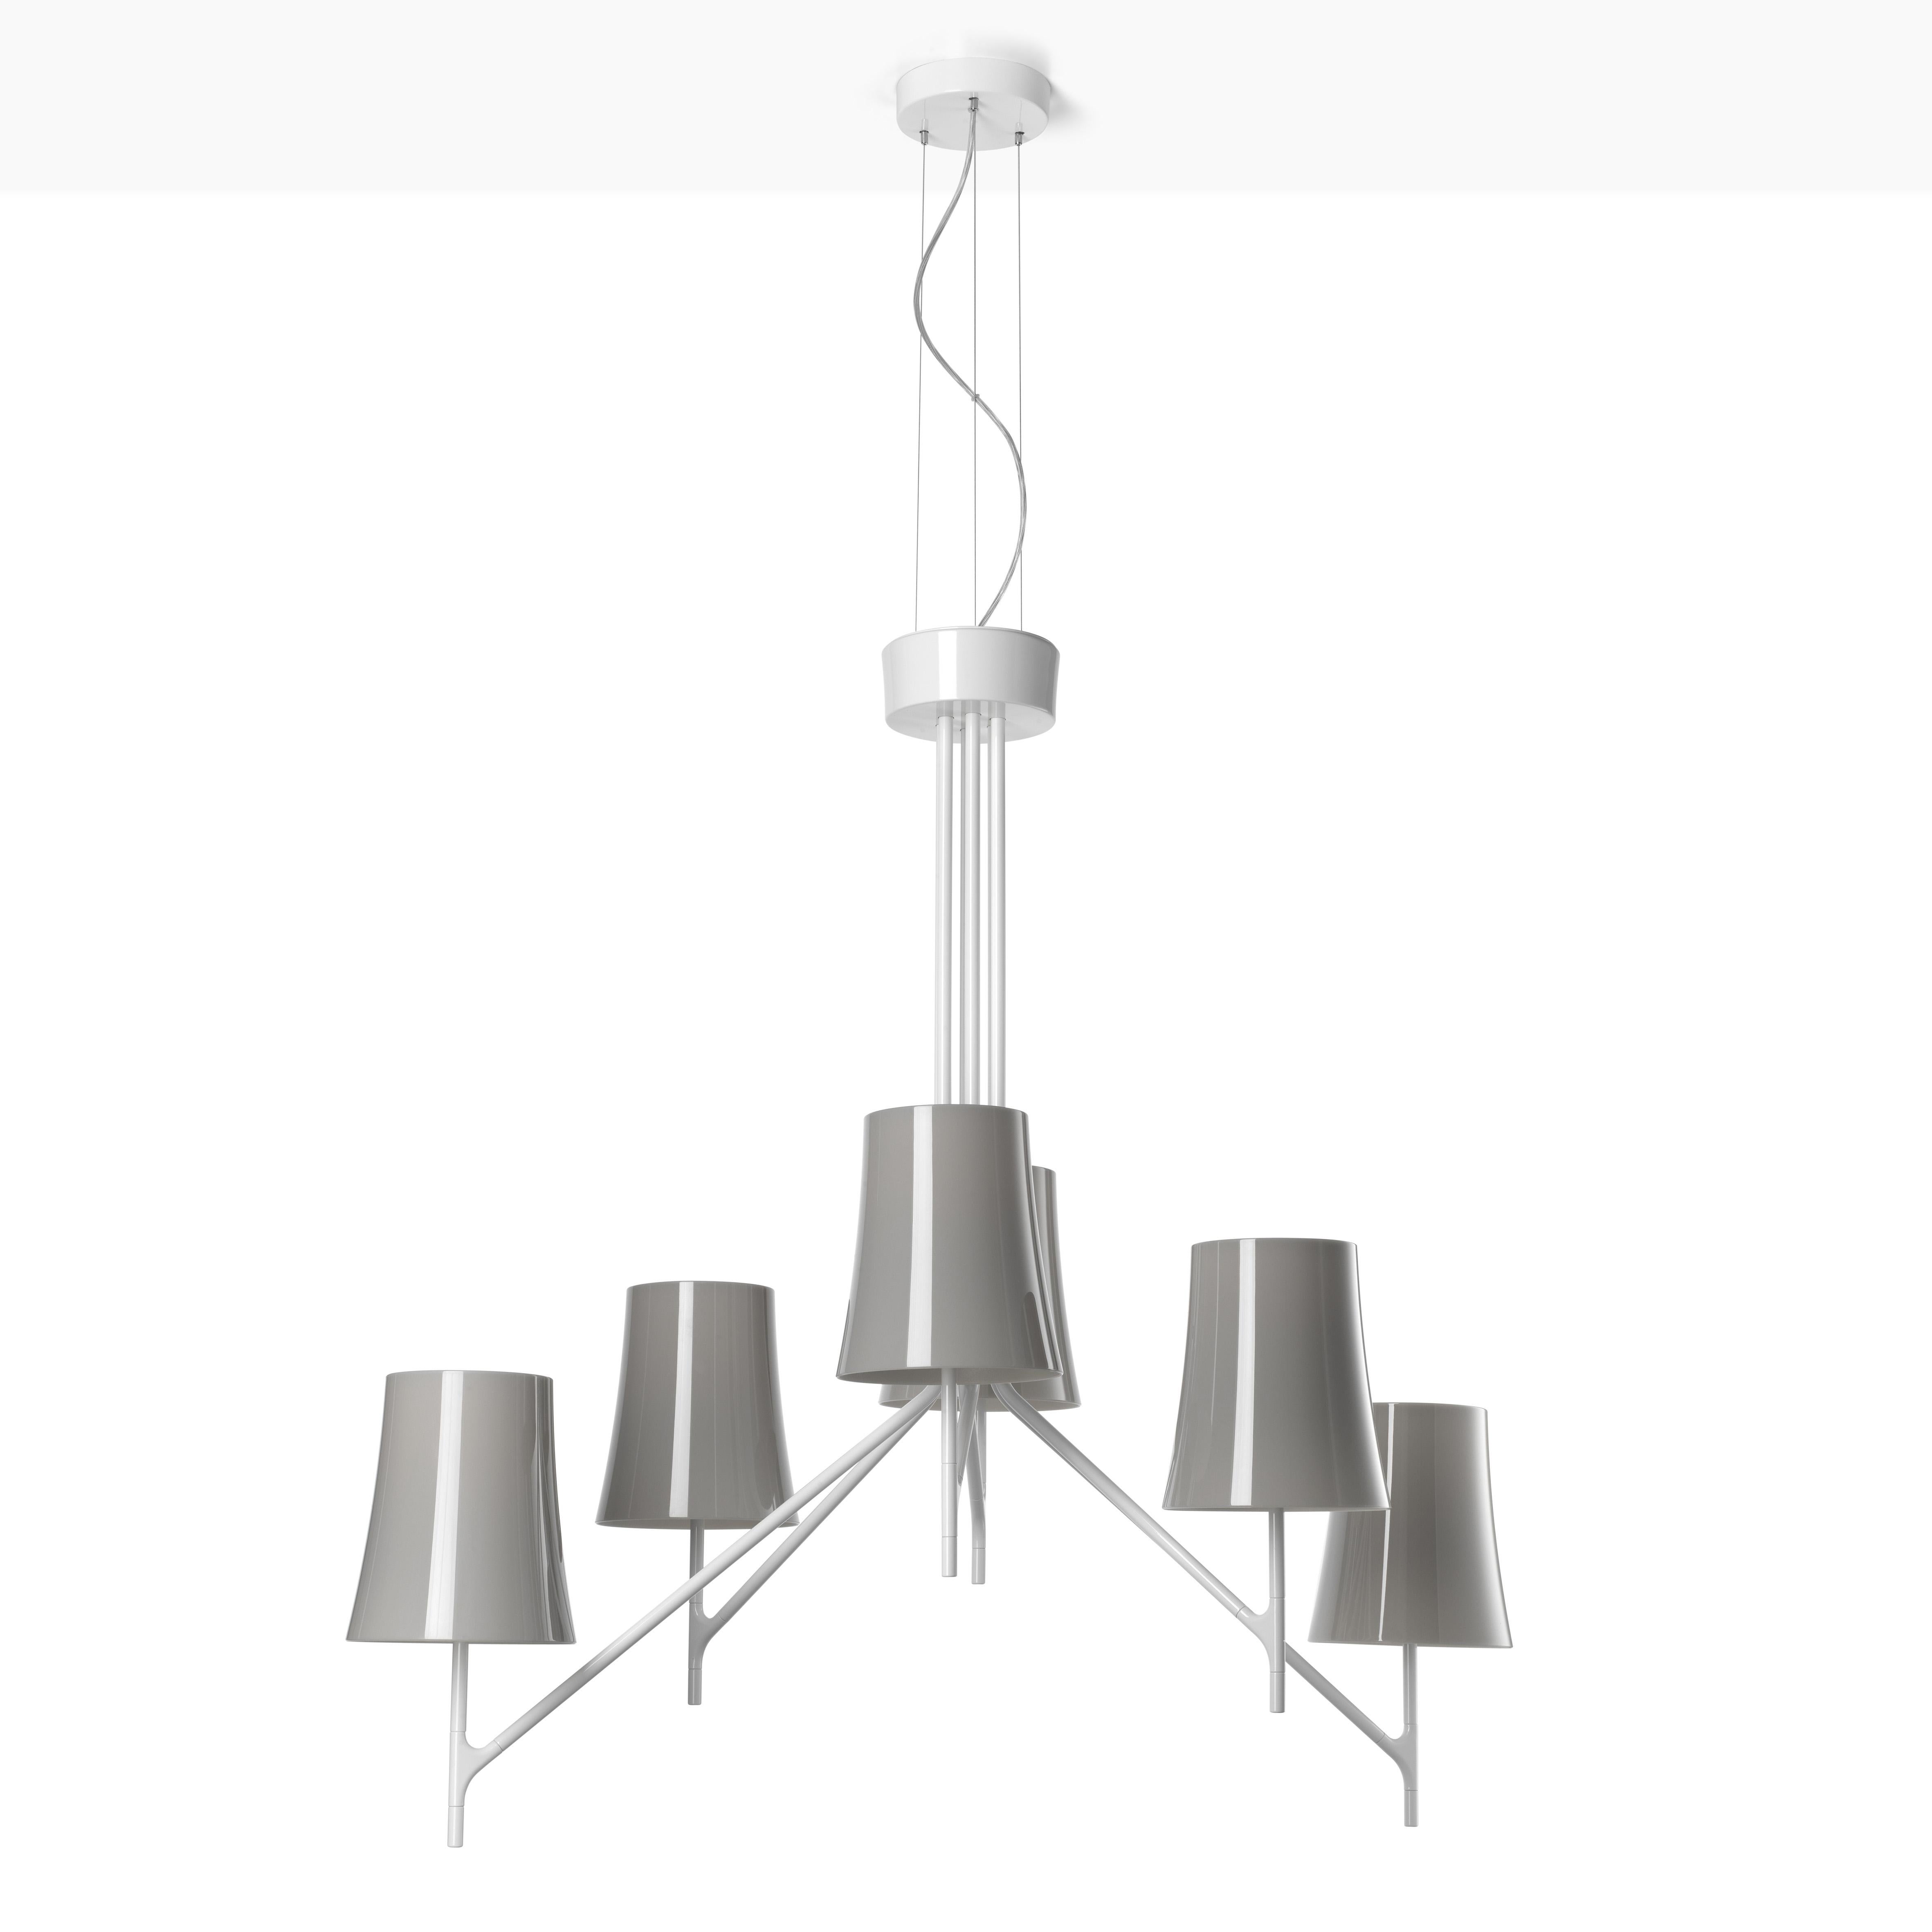 System of diffused light ceiling lamps, available in compositions with 3, 6, 9 arms with rods of 3 different lengths; the versions are achieved by combining several sizes. Metal ceiling flange and aluminum rod, both epoxy powder coated. Opaline